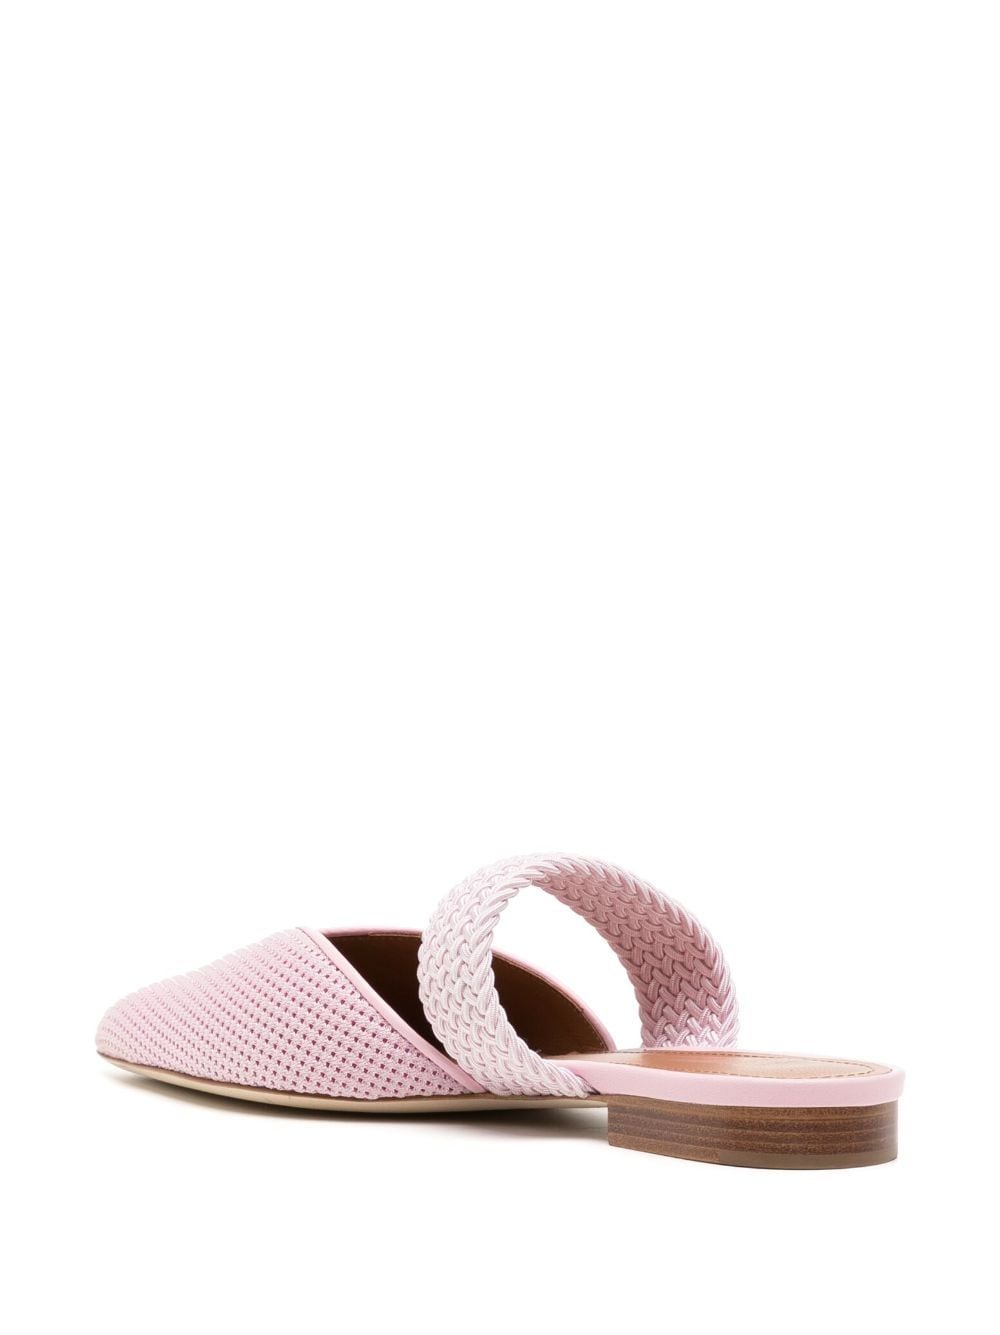 Malone Souliers Maisie pointed-toe Mesh Mules - Farfetch